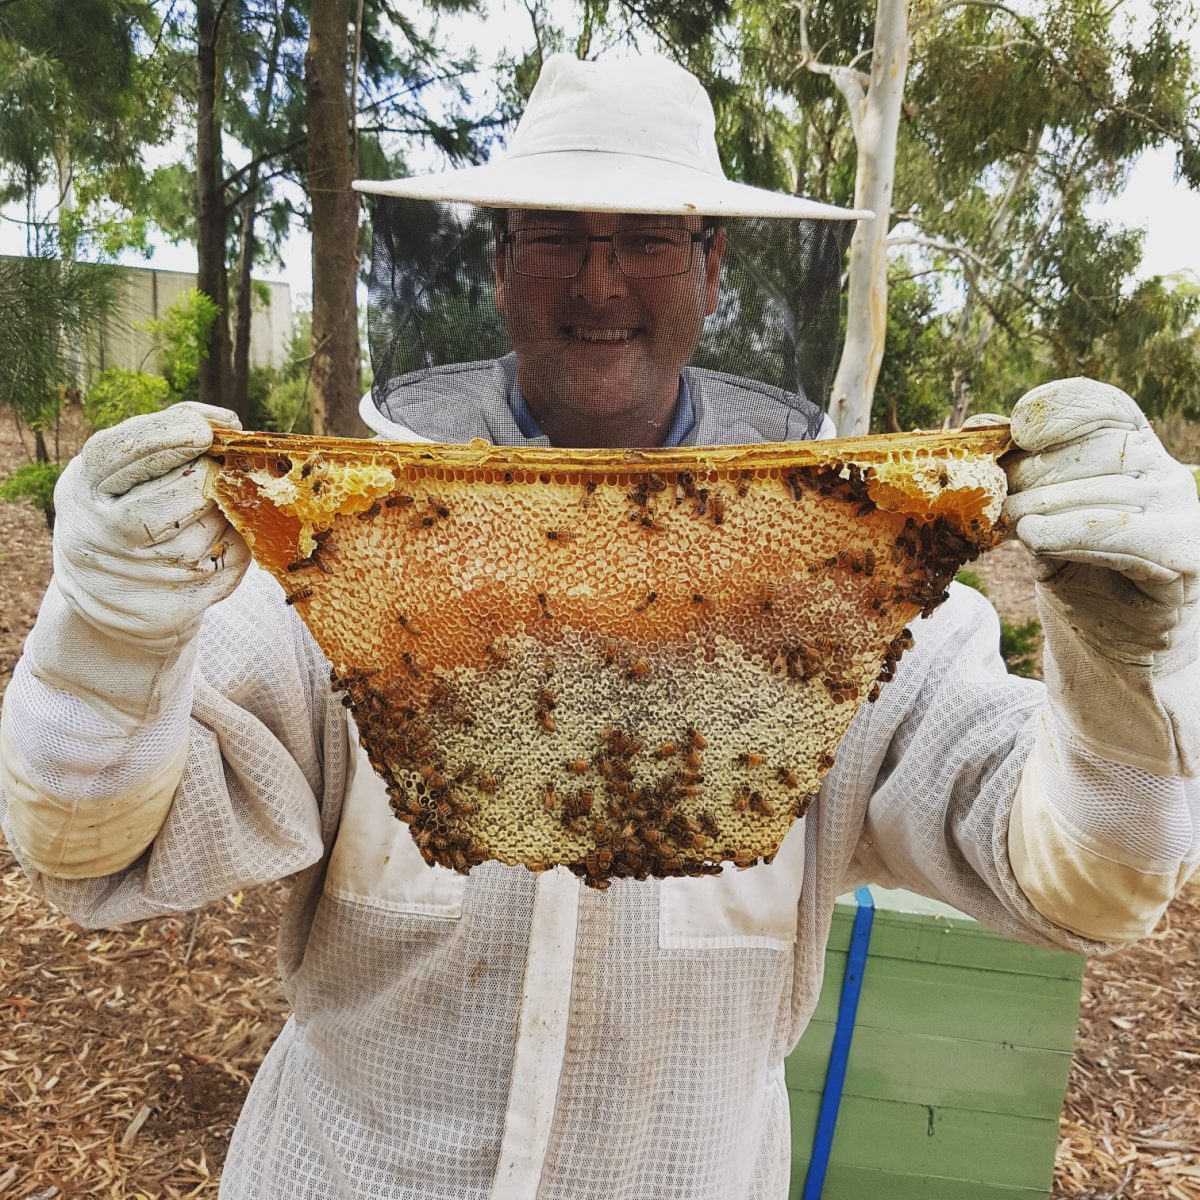 A man in beekeeping gear holding honeycomb